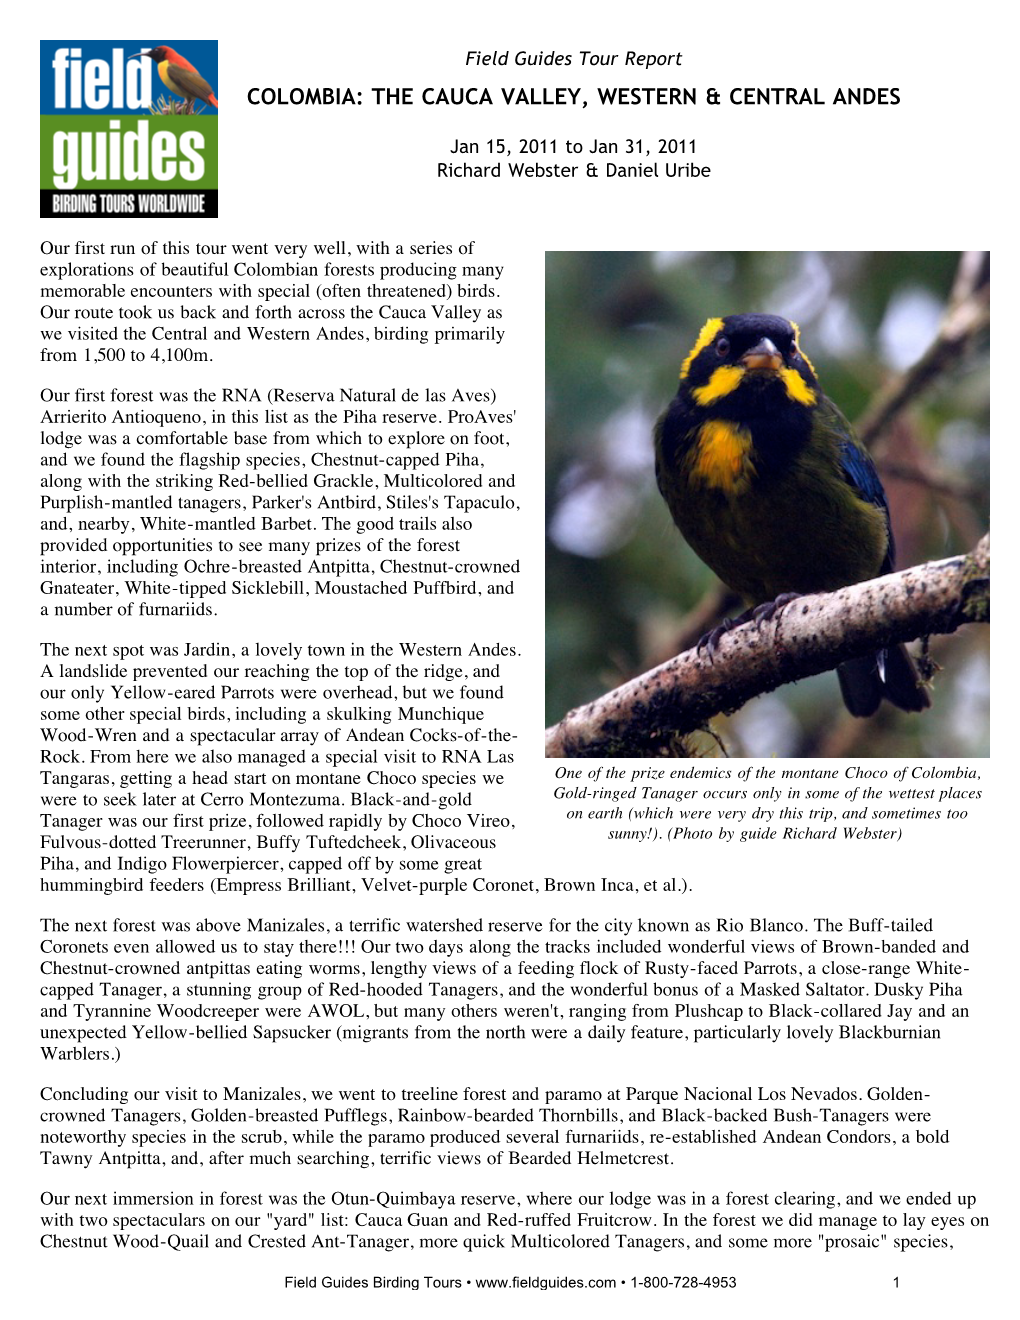 Field Guides Birding Tours: Colombia: the Cauca Valley